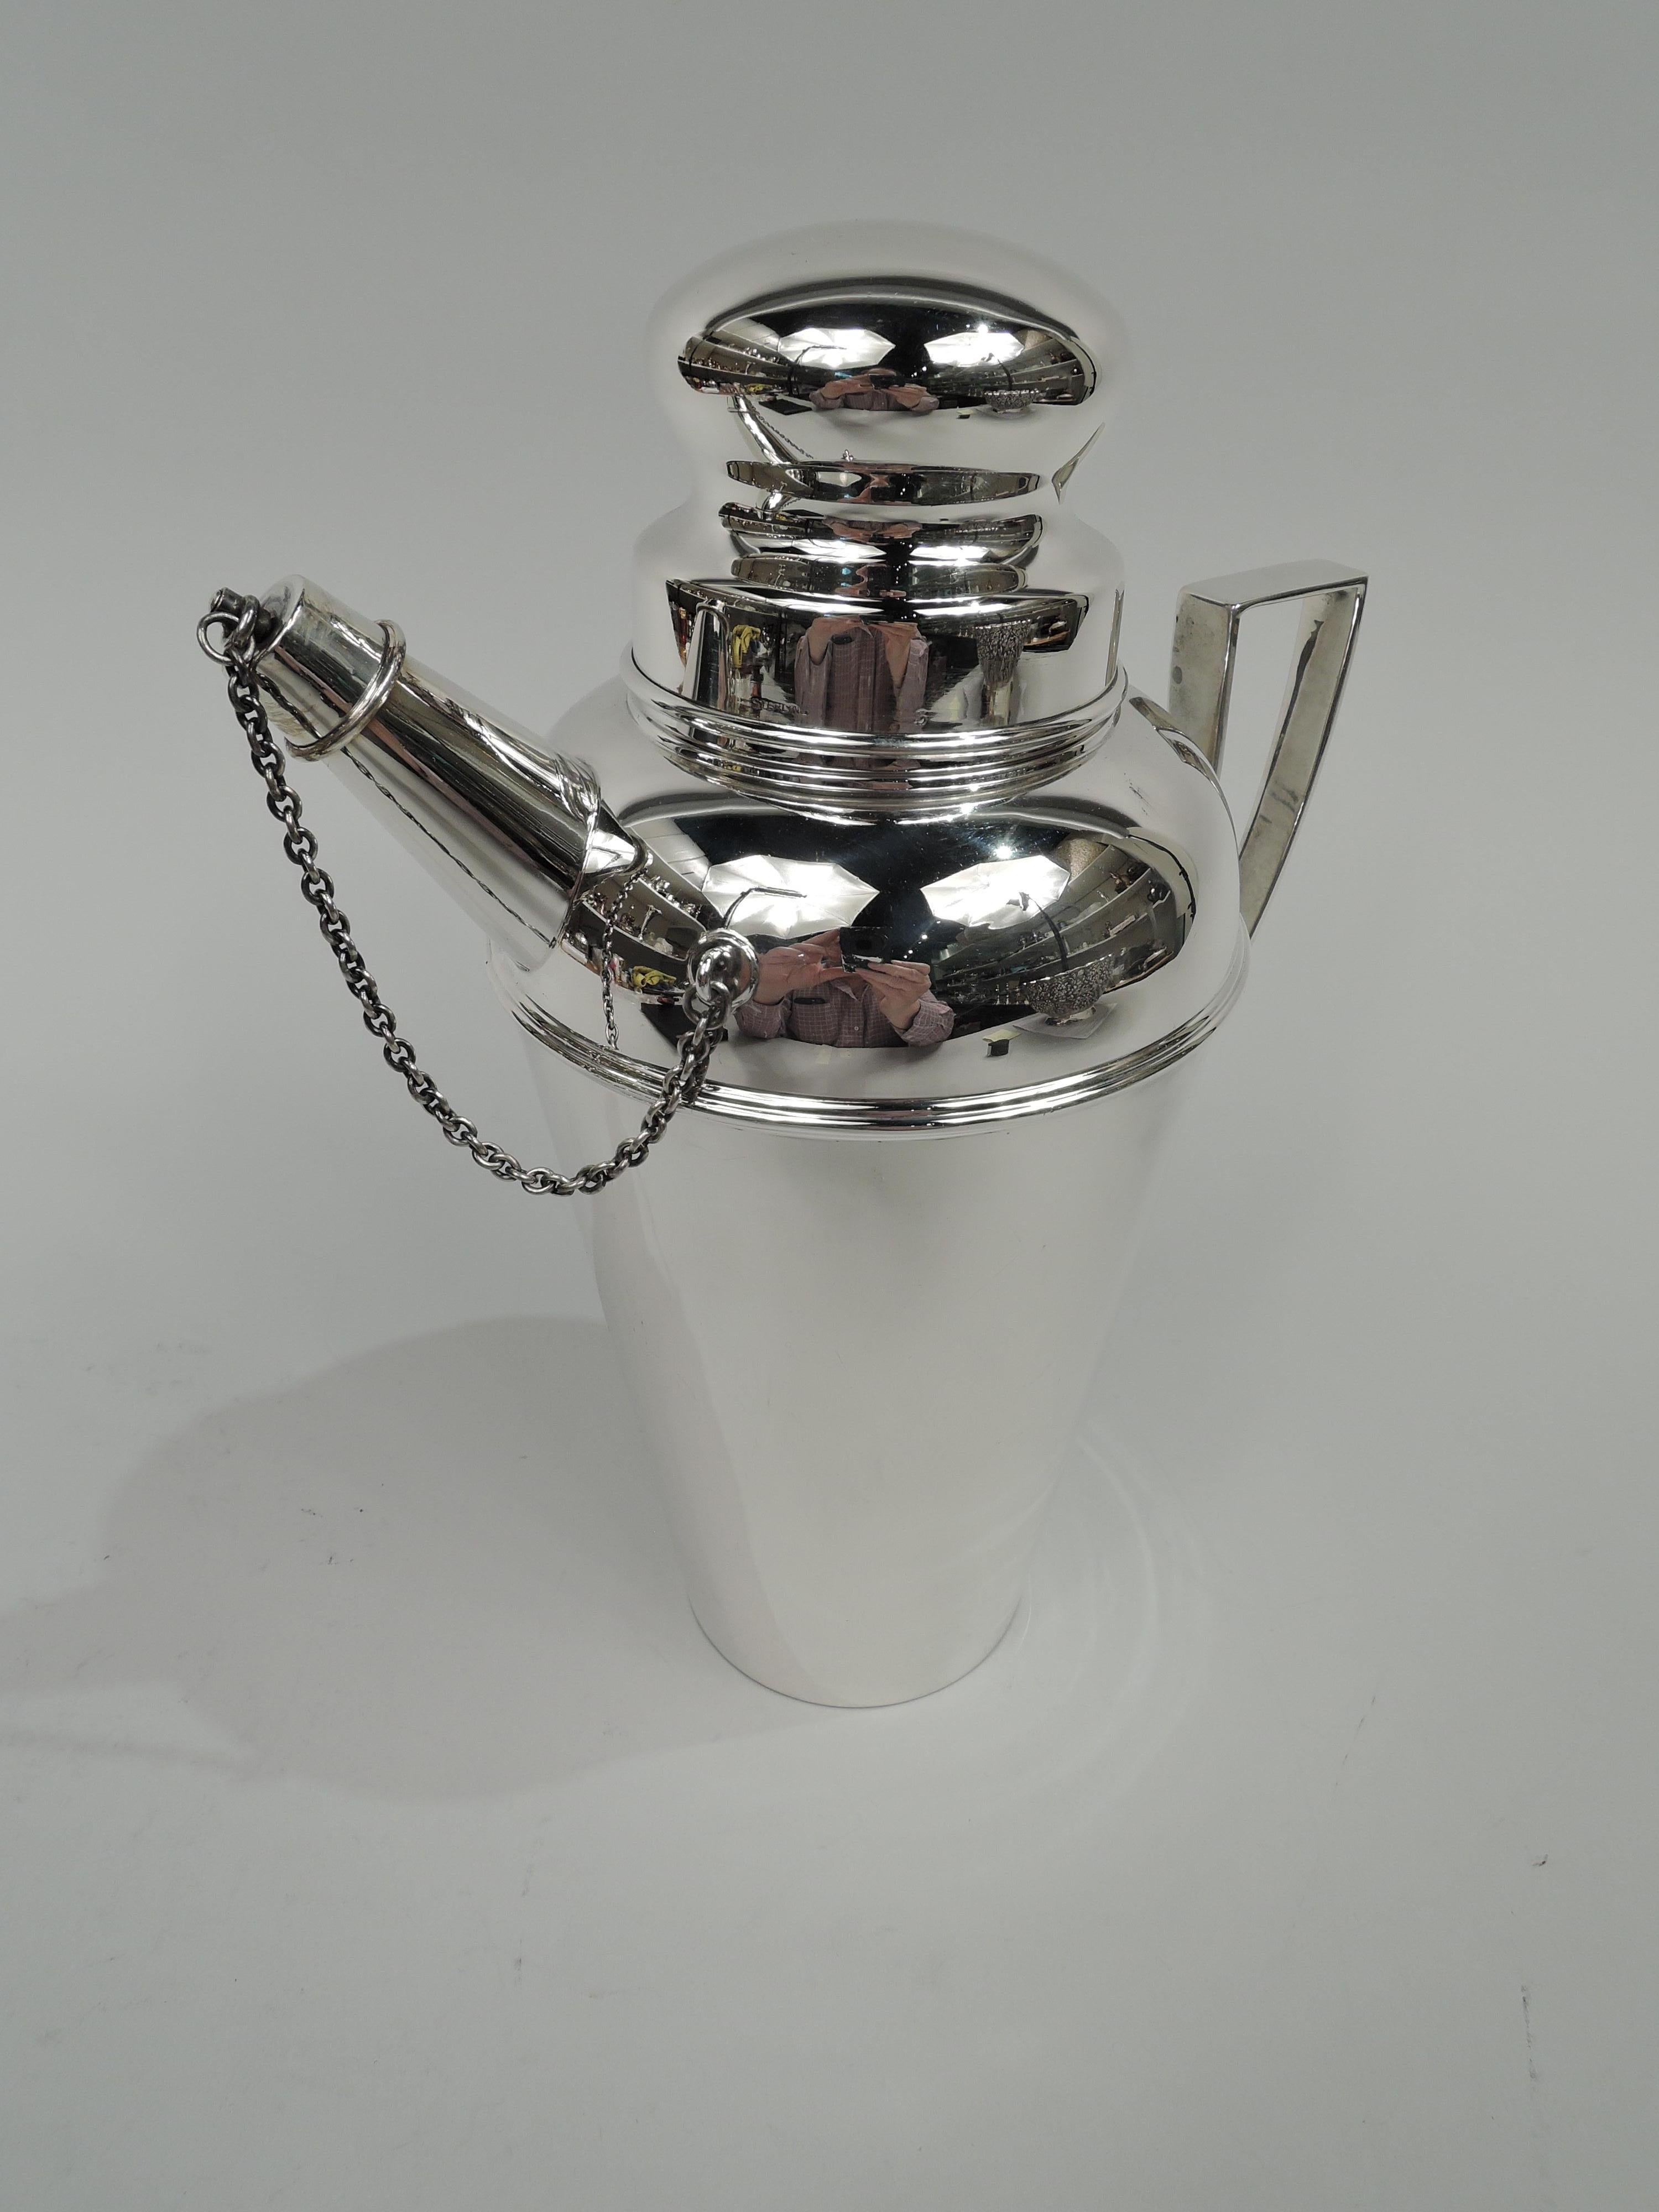 Art Deco sterling silver cocktail shaker, circa 1920. Straight and tapering bowl with curved shoulder, scroll bracket handle, and stubby diagonal spout with threaded chained cap. Inset neck with snug-fitting bun cover. Fully marked including maker’s